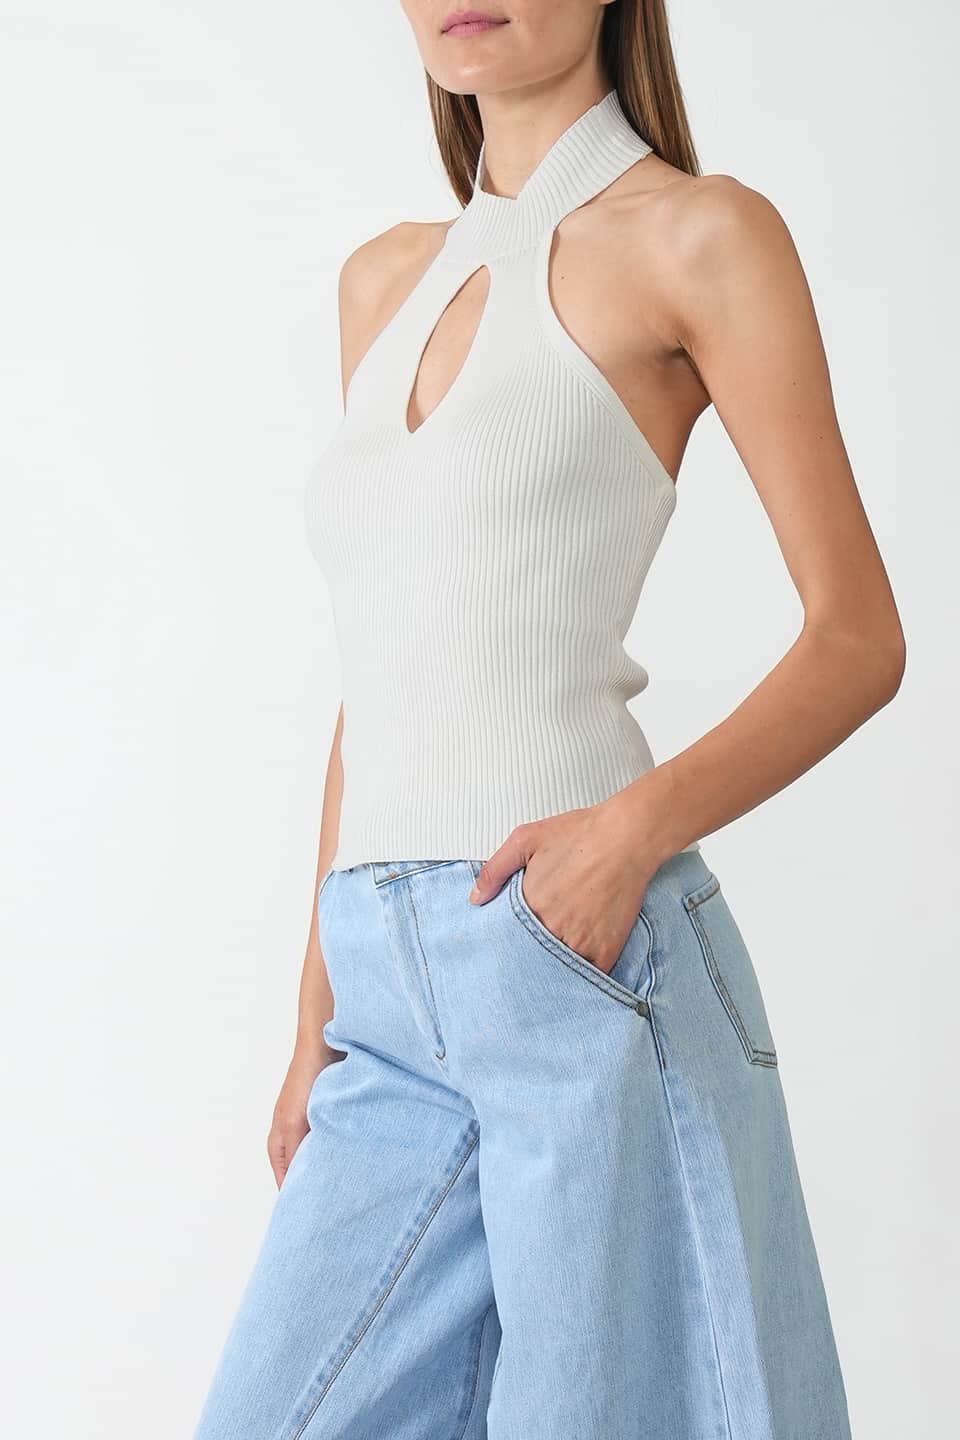 Thumbnail for Product gallery 3, Backless Stretch Top Latte